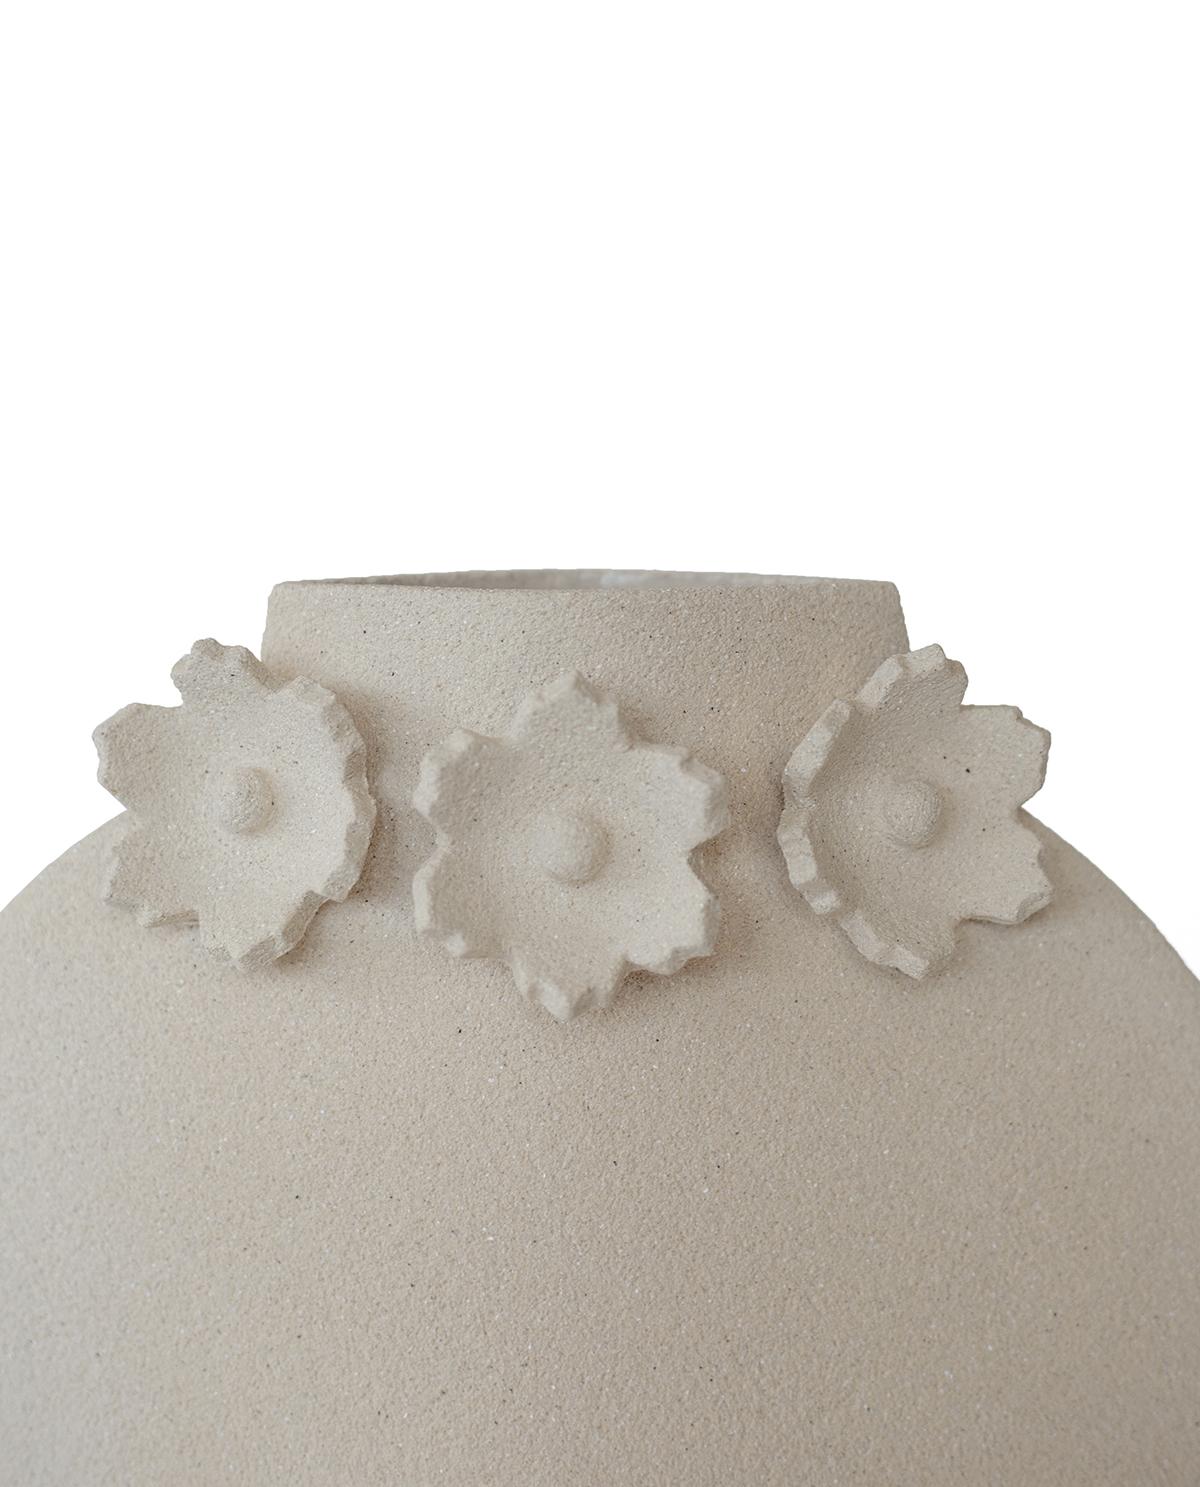 Minimalist 21st Century 'Sculptural Flowers' Vase in White Ceramic, Hand-Crafted in France For Sale